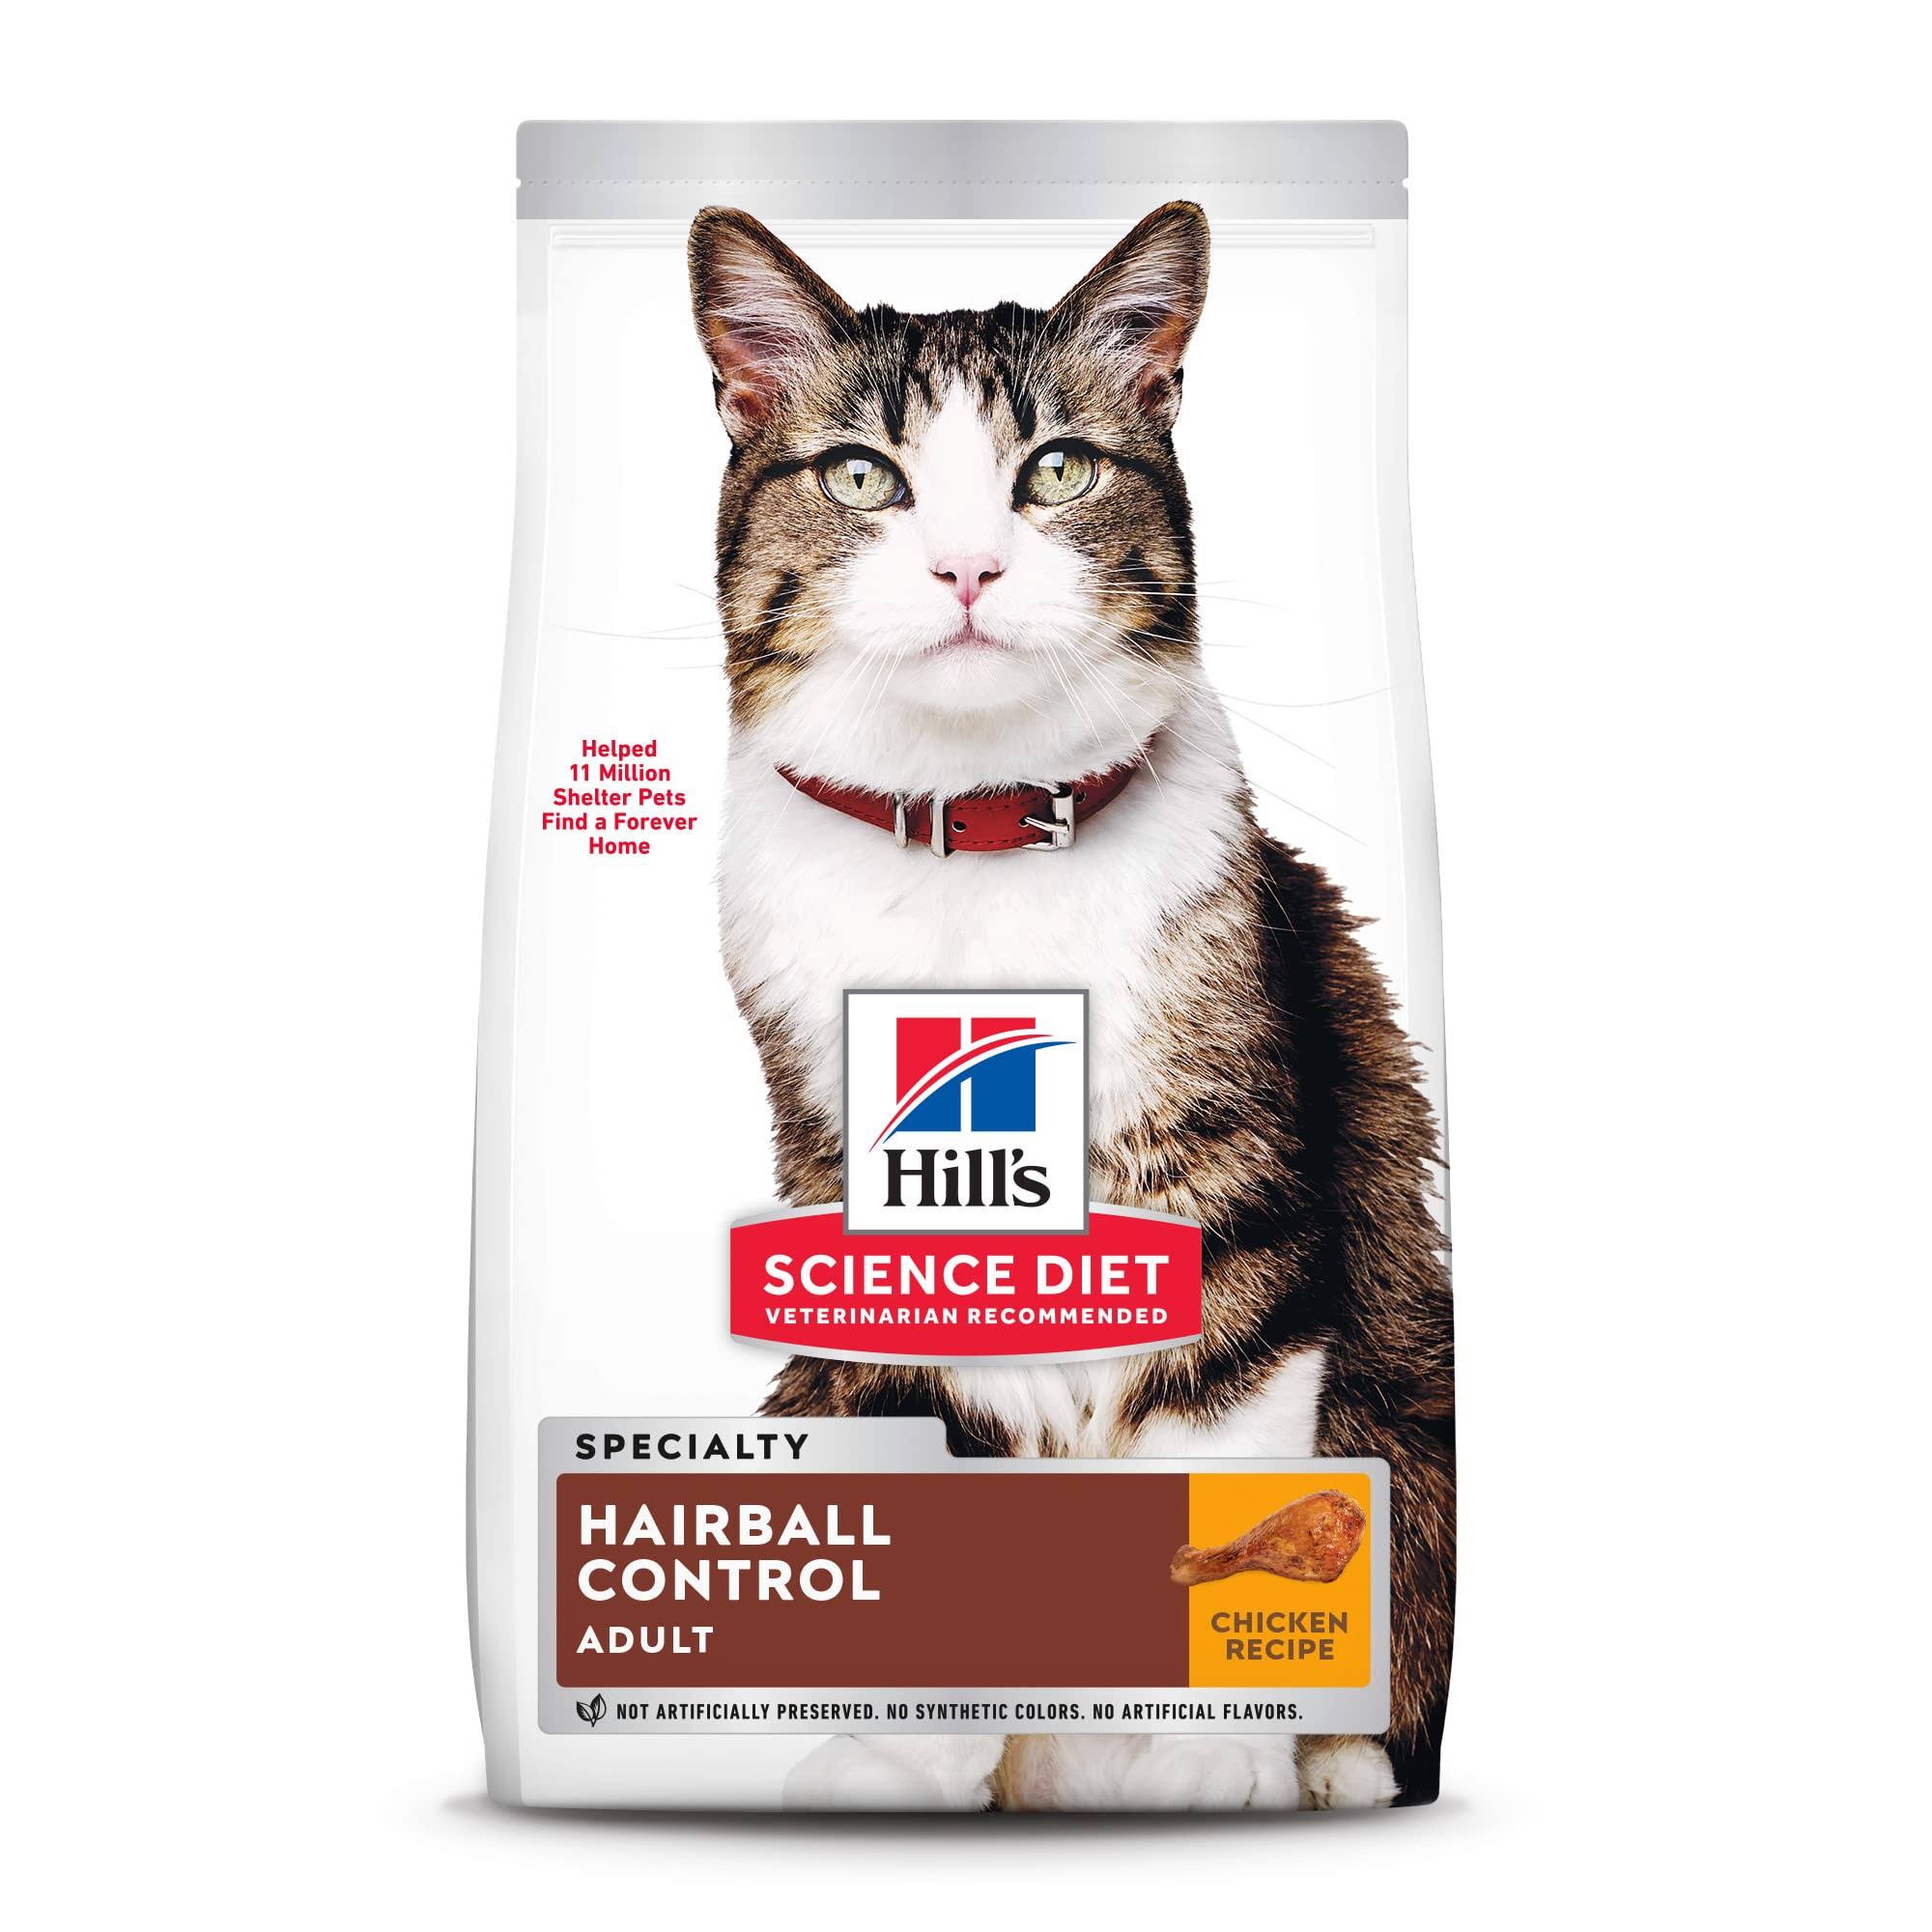 Hill's Science Diet Hairball Control Premium Natural Cat Food - Chicken Recipe, Adult 1-6, 7lbs